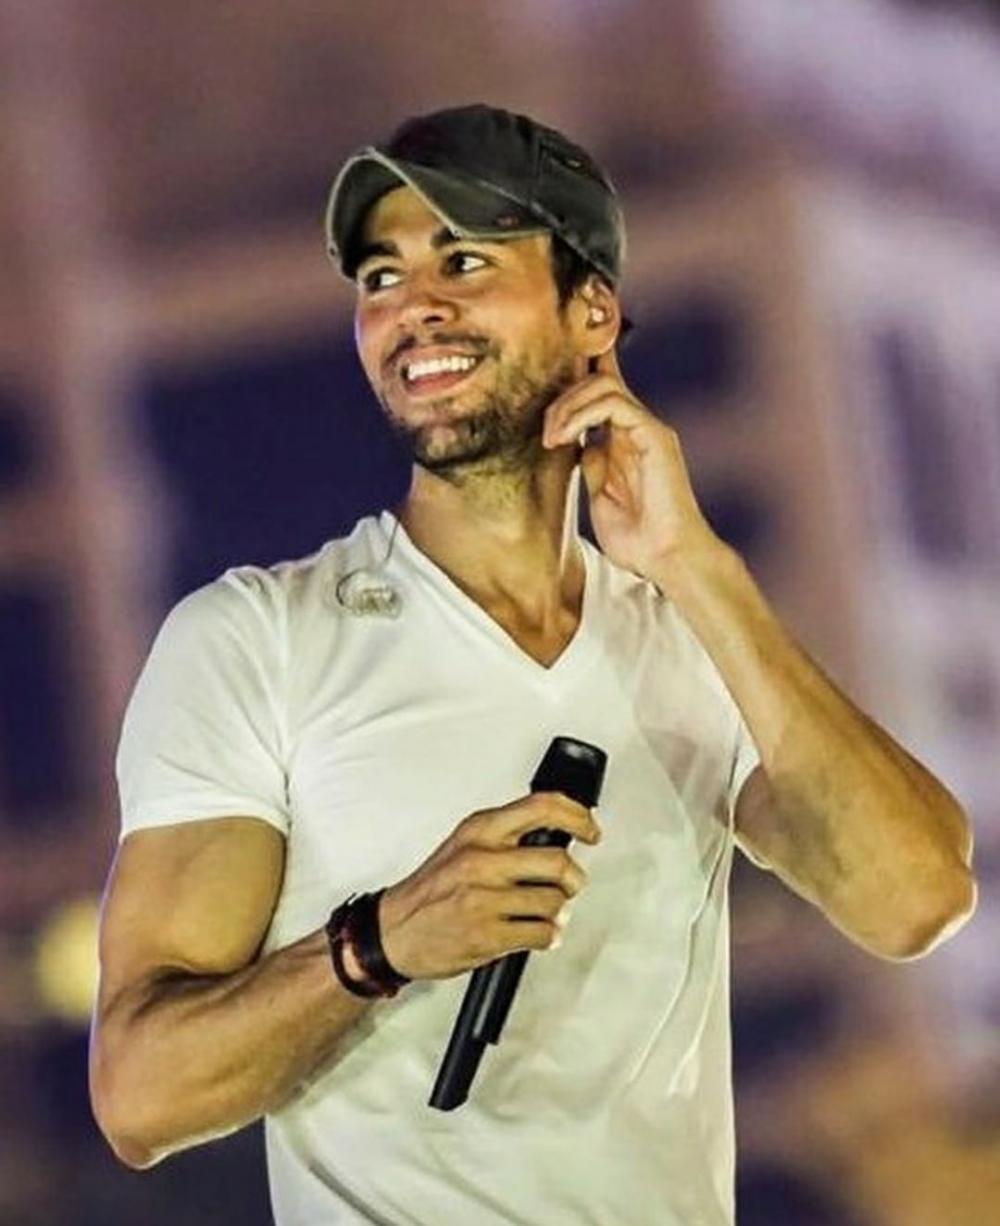 The Weekend Leader - Enrique returns with FINAL after 7 years